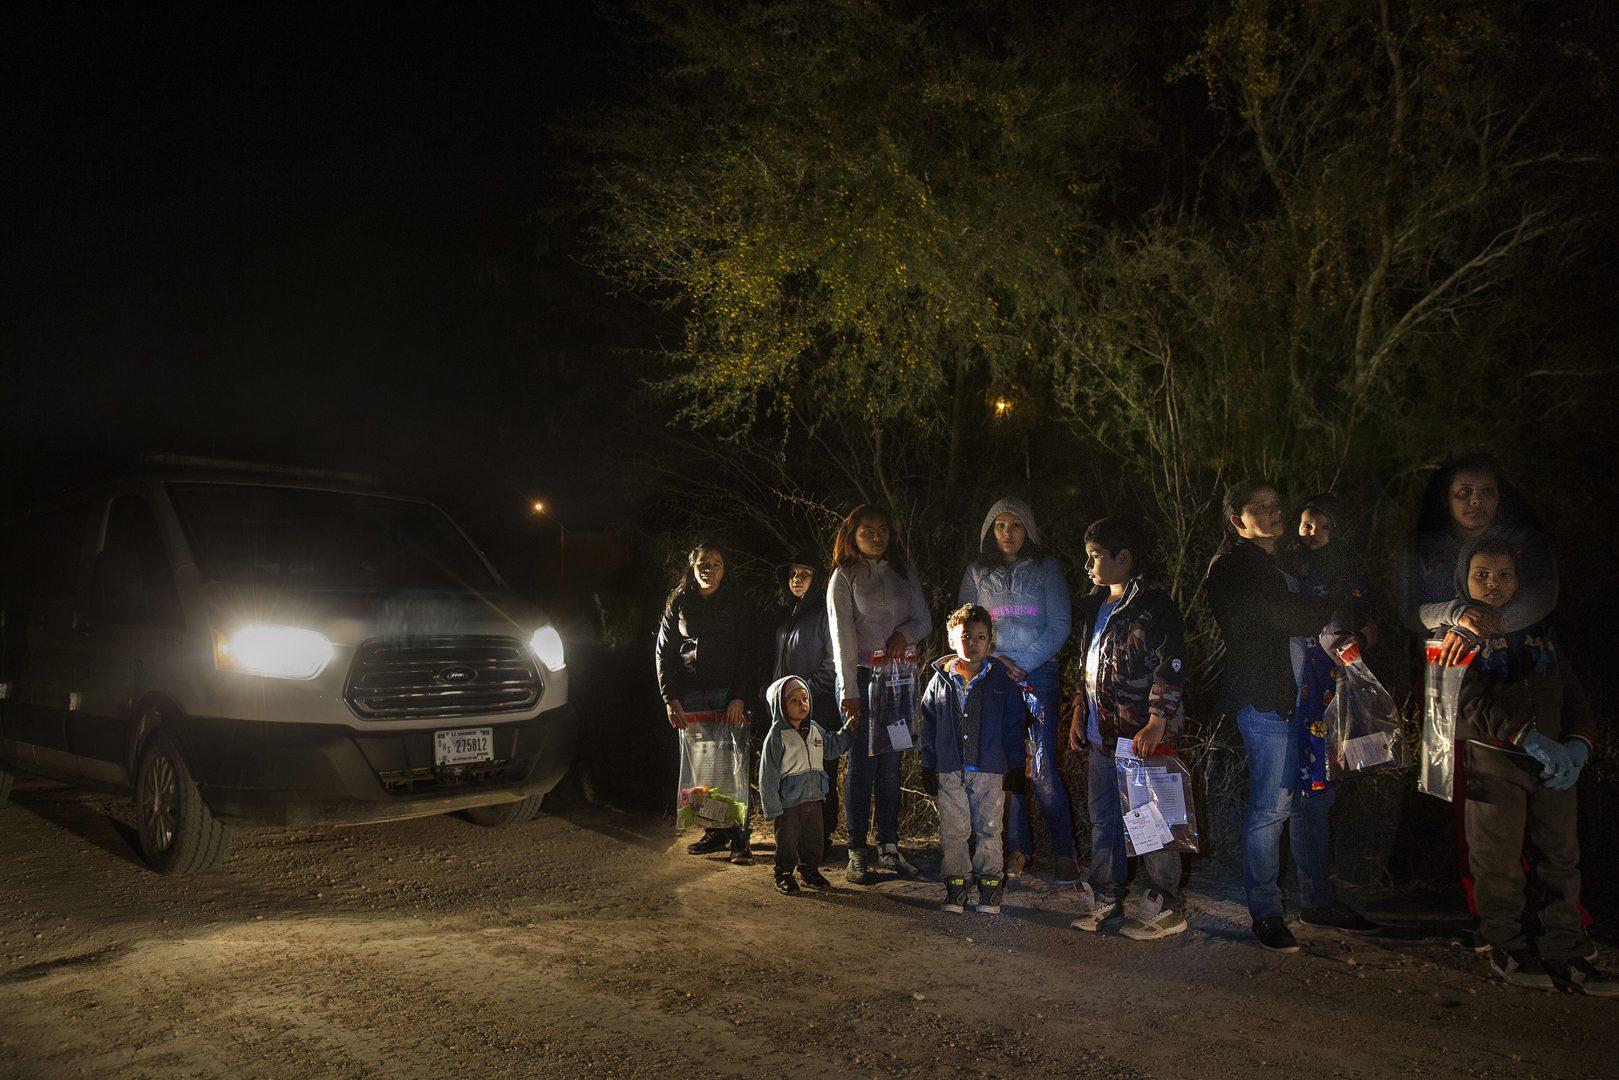 After crossing the Rio Grande River at night with the help of smugglers, a group of mainly women and children from Central America are detained by U.S. Border Patrol agents before being taken into detention on Jan. 27, 2017. The Trump administration said it will end protections for Nicaraguans, but has delayed a decision on Hondurans. (Carolyn Cole/Los Angeles Times)